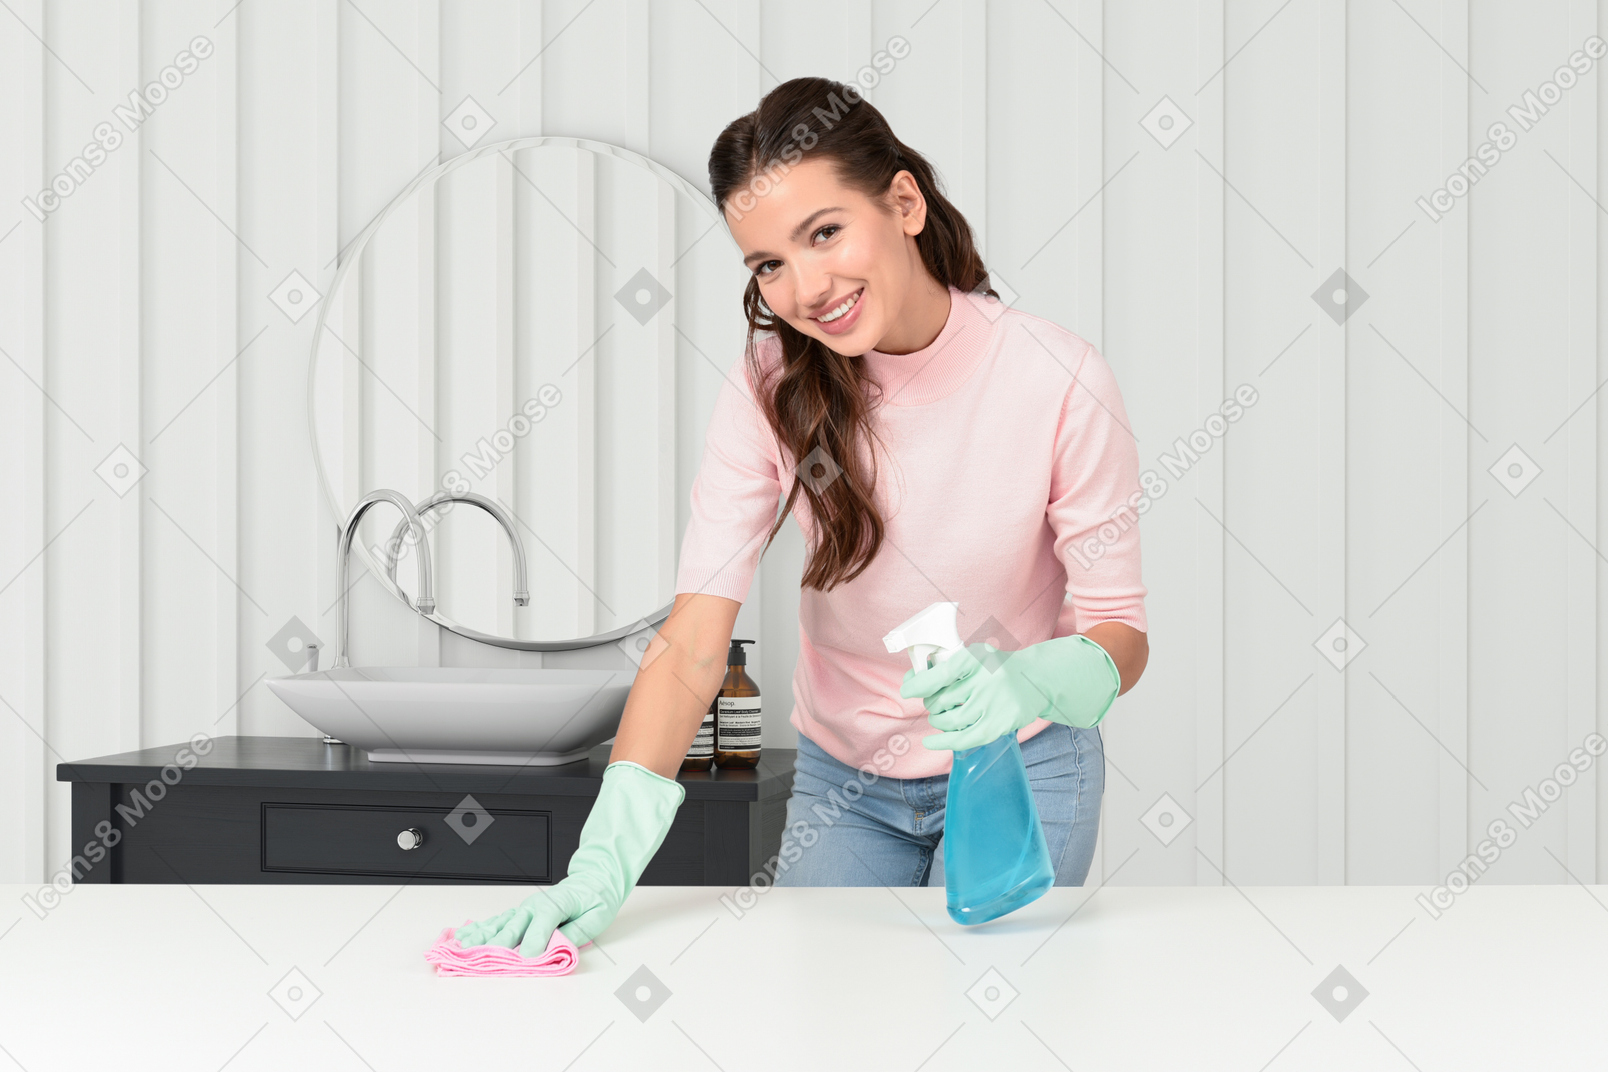 A woman in a pink shirt and green gloves cleaning a table